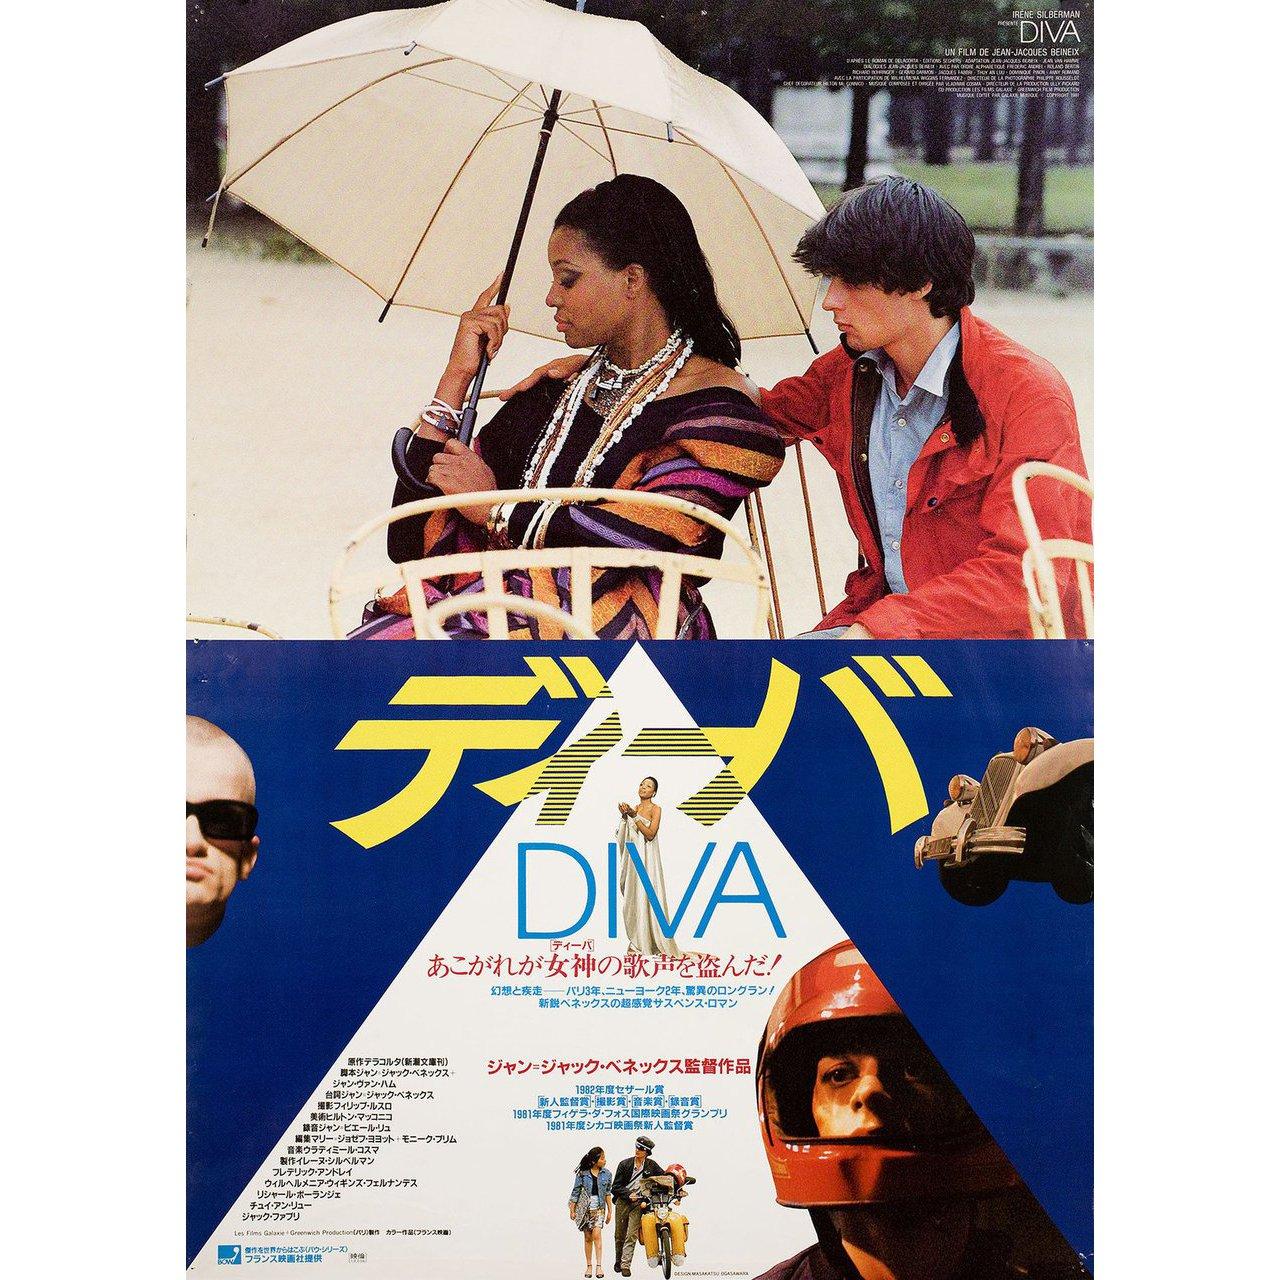 Original 1983 Japanese B2 poster by Masakatsu Ogasawara for the film Diva directed by Jean-Jacques Beineix with Wilhelmenia Fernandez / Frederic Andrei / Richard Bohringer / Thuy An Luu. Very good-fine condition, rolled. Please note: the size is